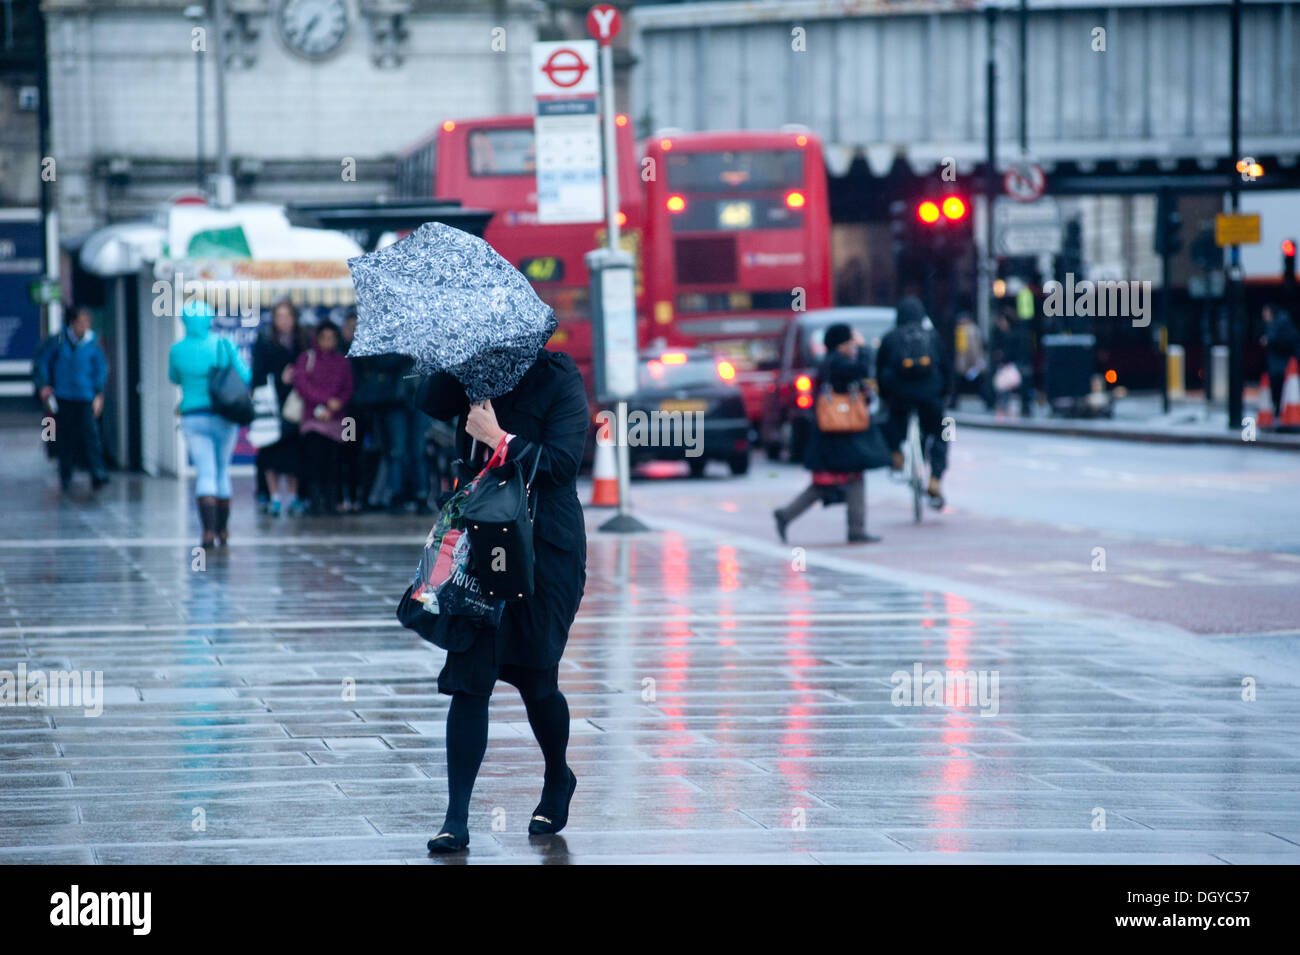 London, UK - 28 October 2013: a woman crossing London Bridge struggles with her umbrella as the city is hit by the storm. The storm, called St Jude, brought the windiest weather to hit the UK since 1987.  Credit:  Piero Cruciatti/Alamy Live News Stock Photo